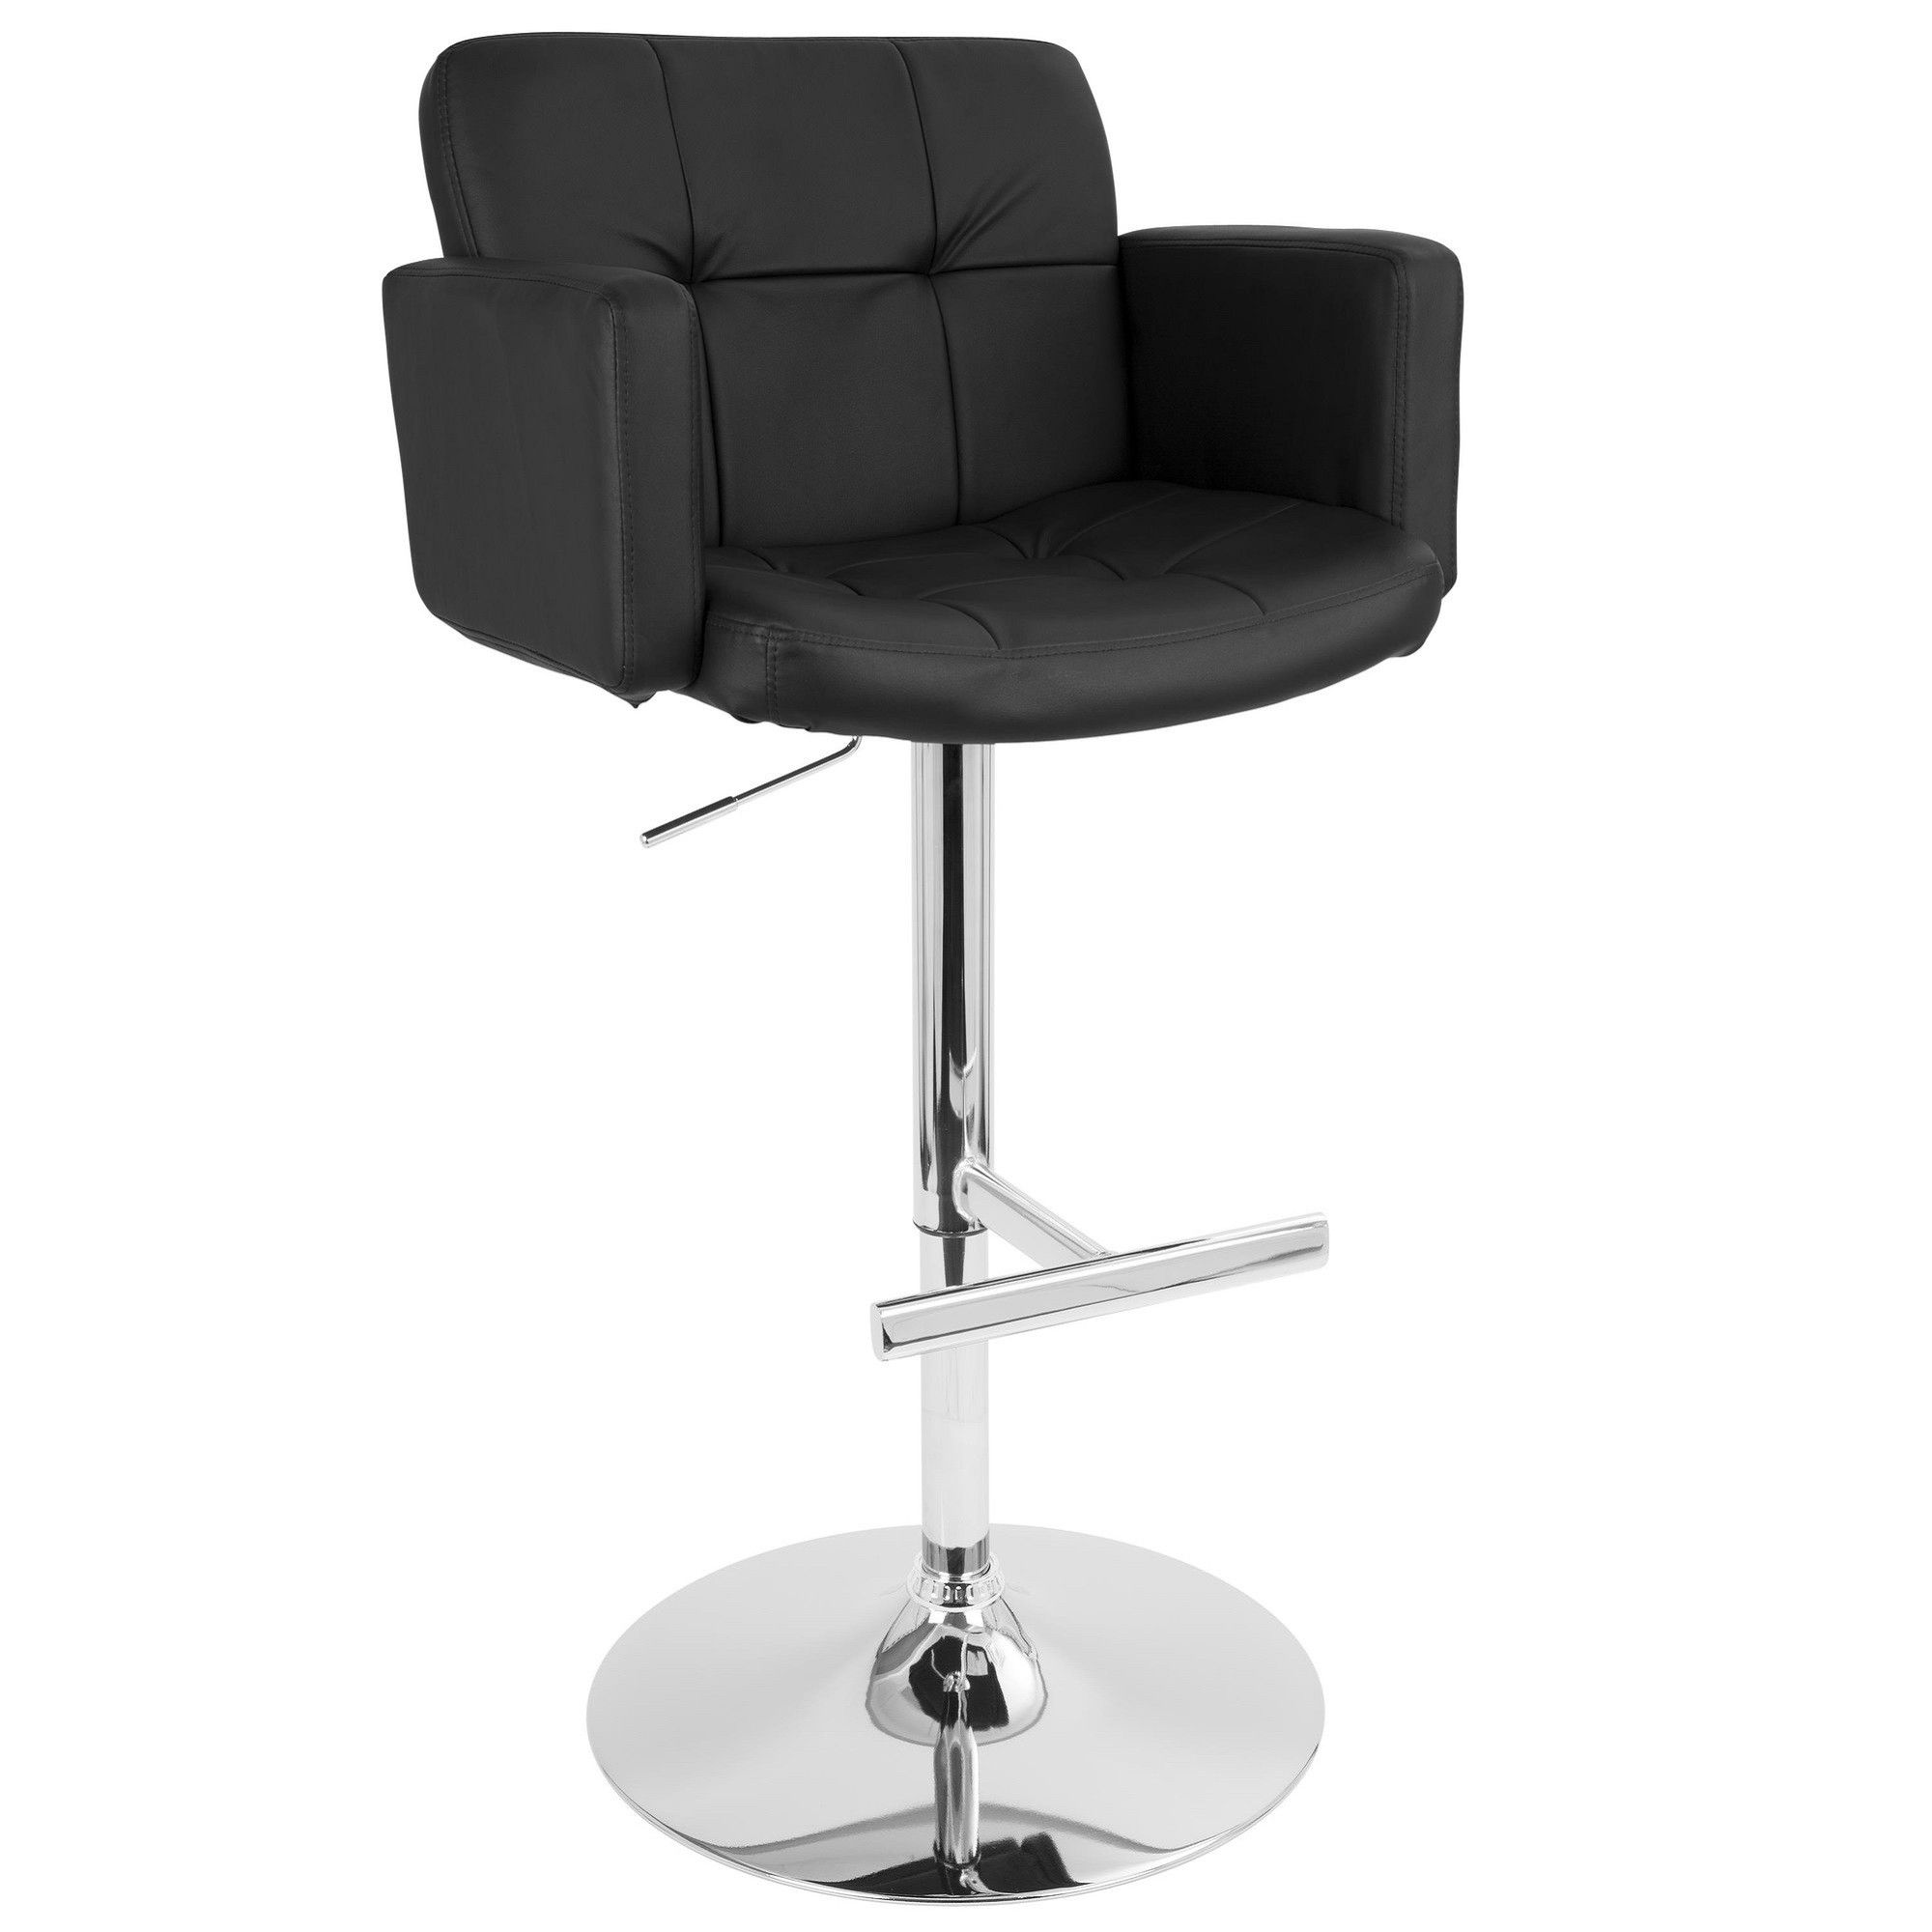 Contemporary Home Living 47” Black Leather and Silver Tufted Adjustable Stout Bar Stool